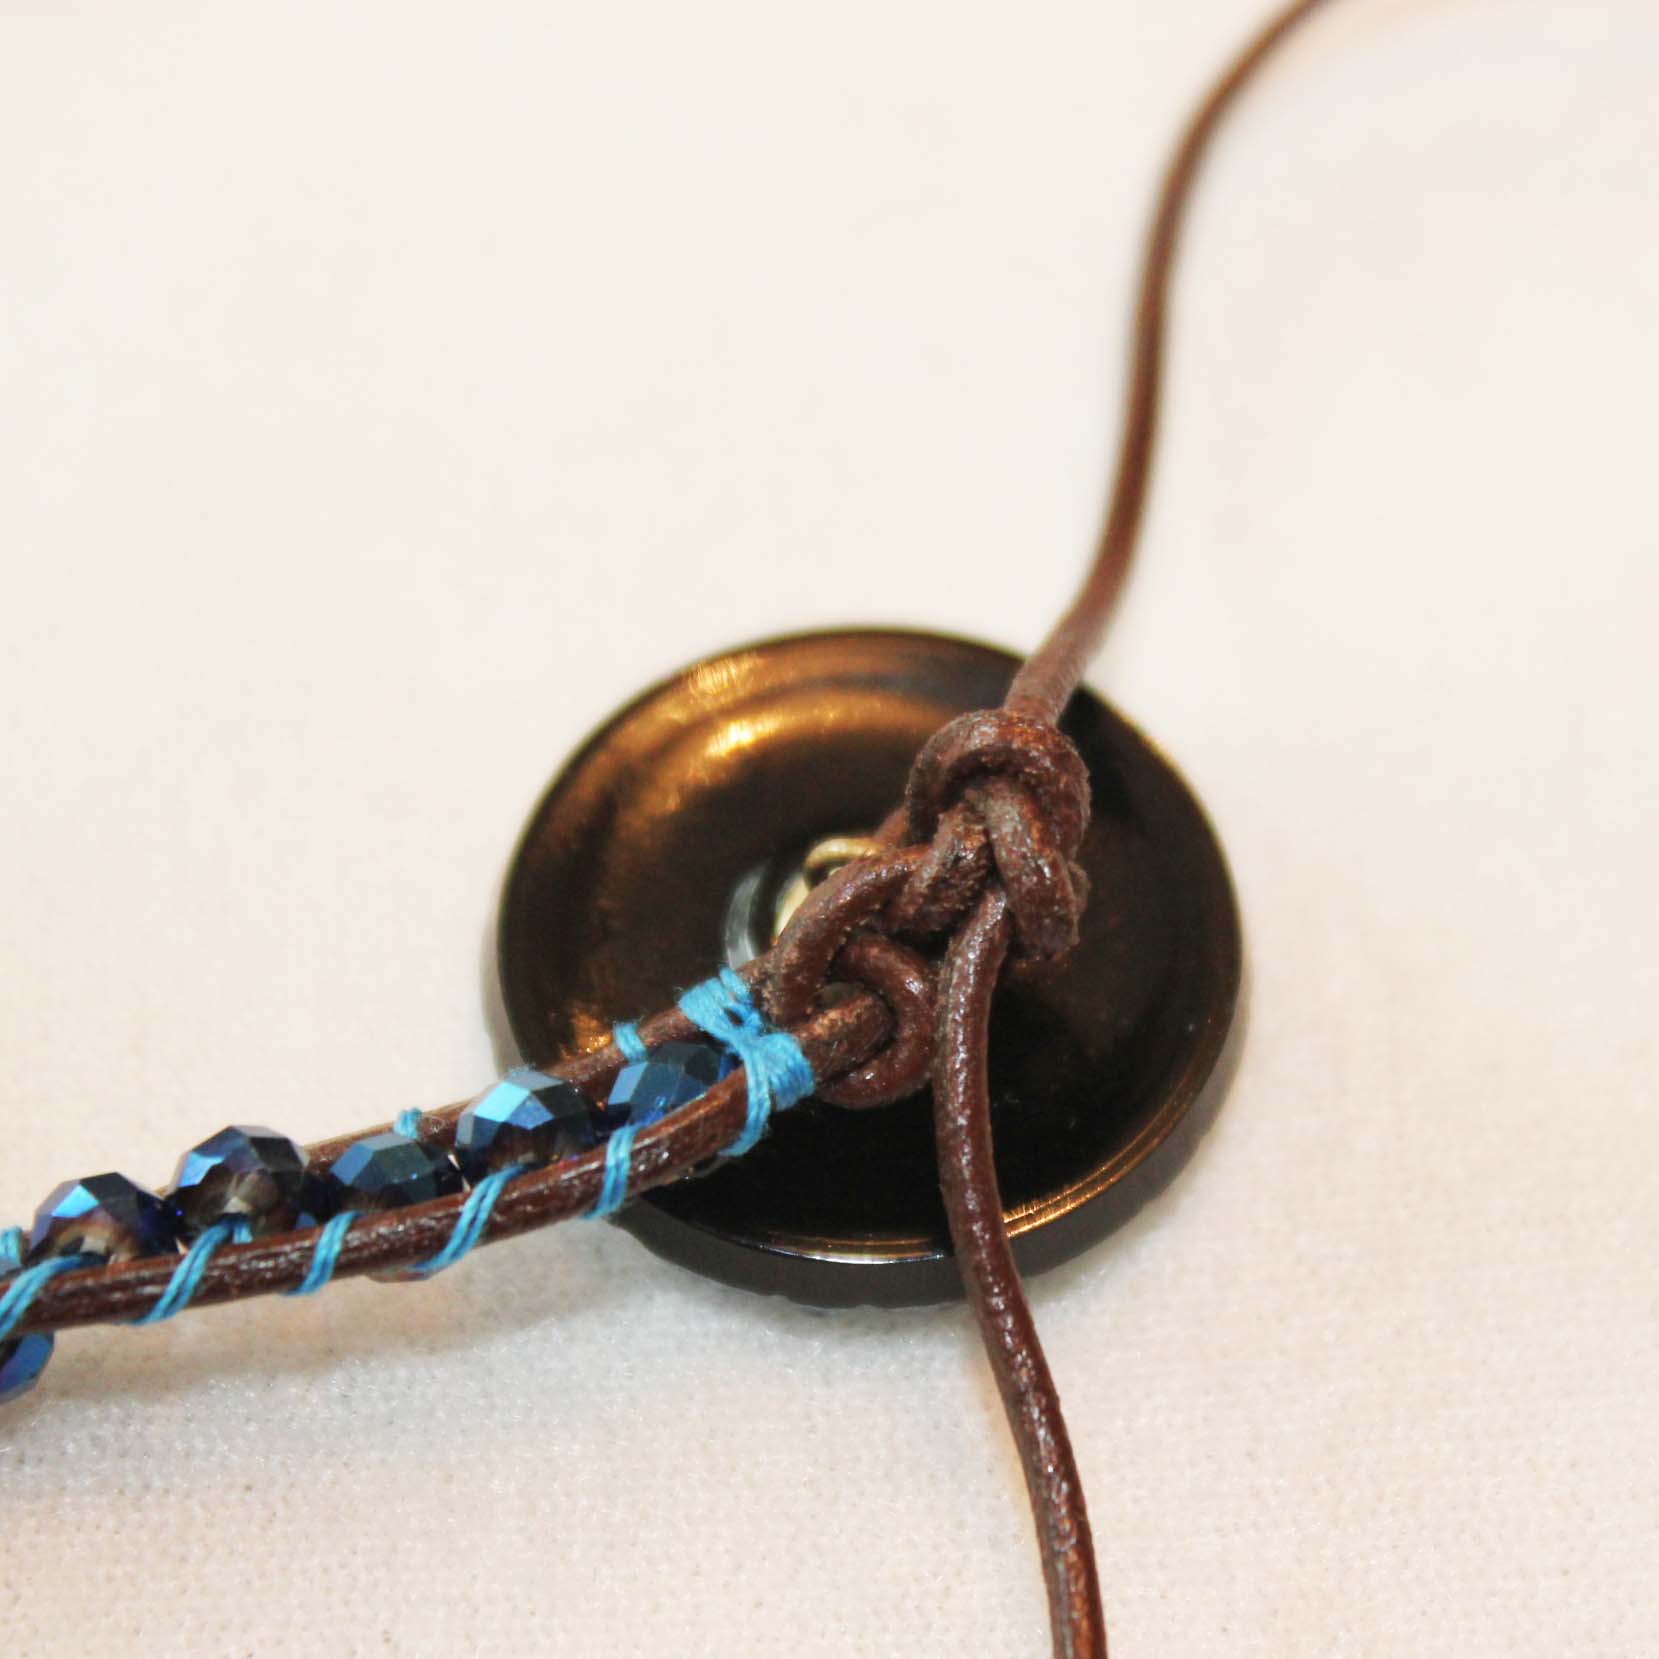 Tie a knot in the leather to finish, trim ends and glue all leather and thread knots